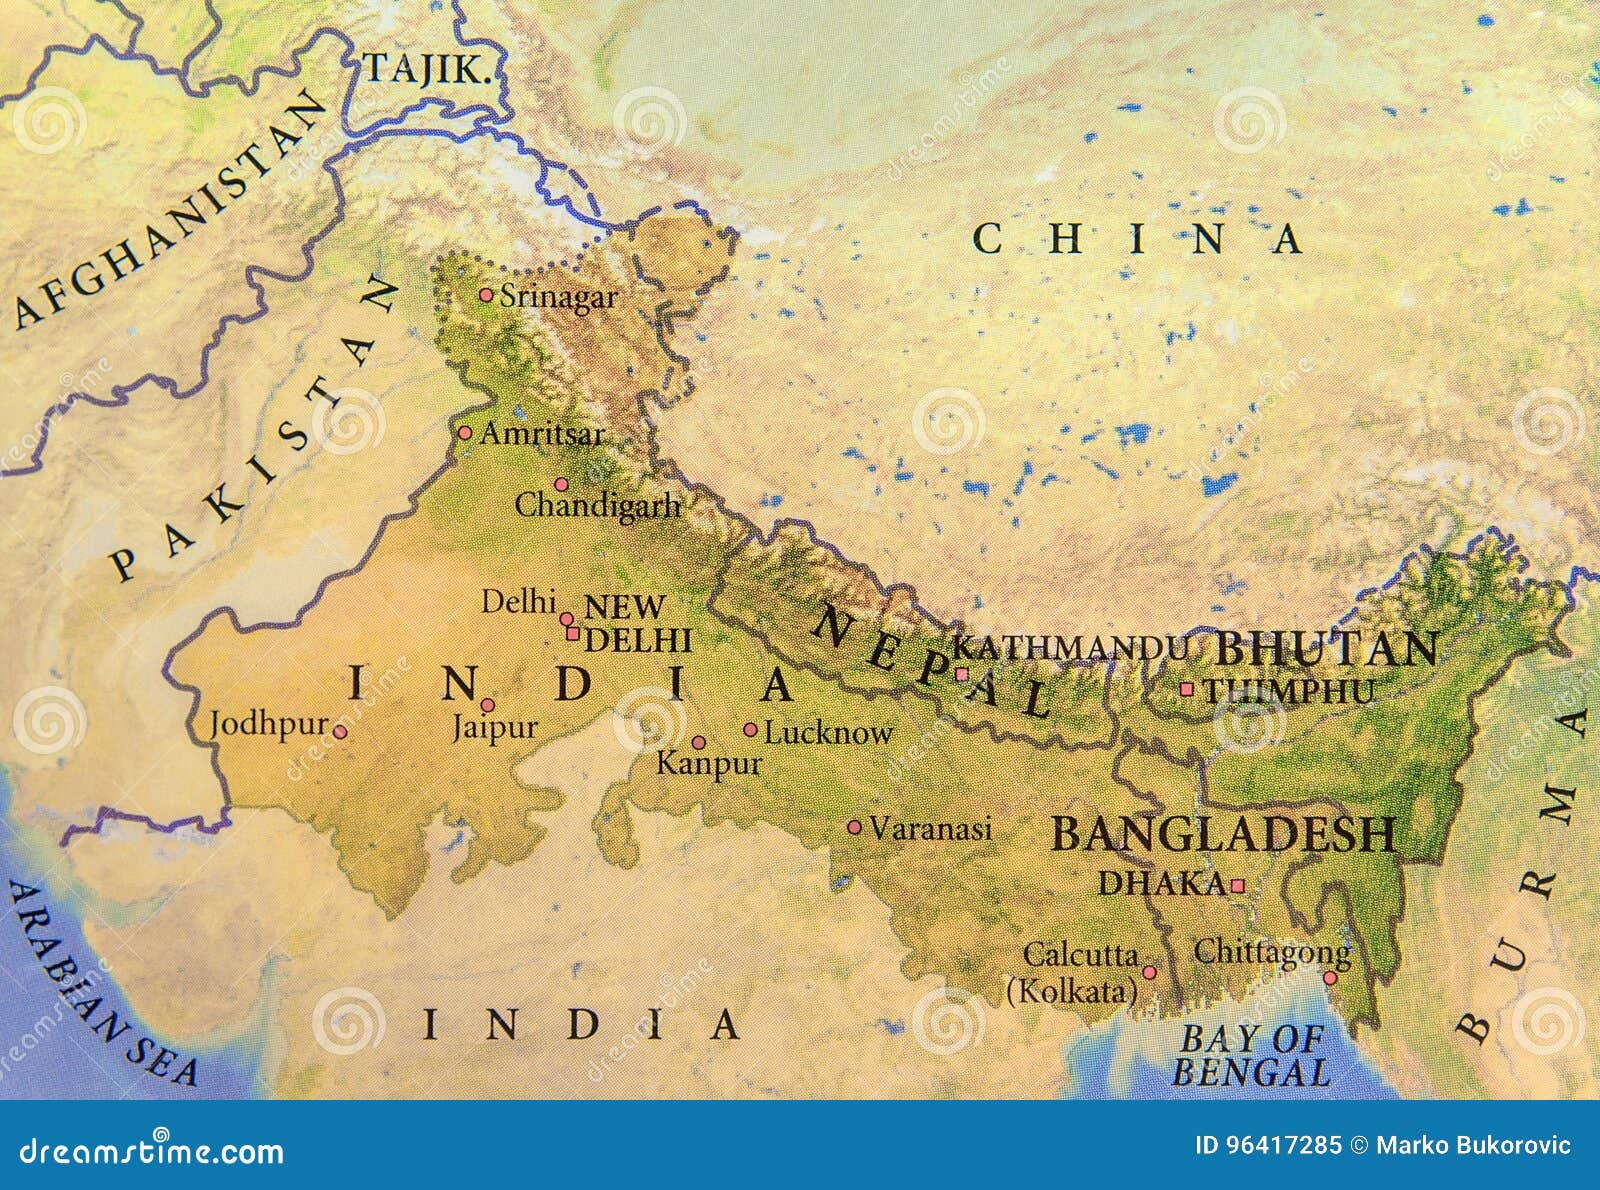 geographic map of india, nepal, bhutan and bangladesh with important cities